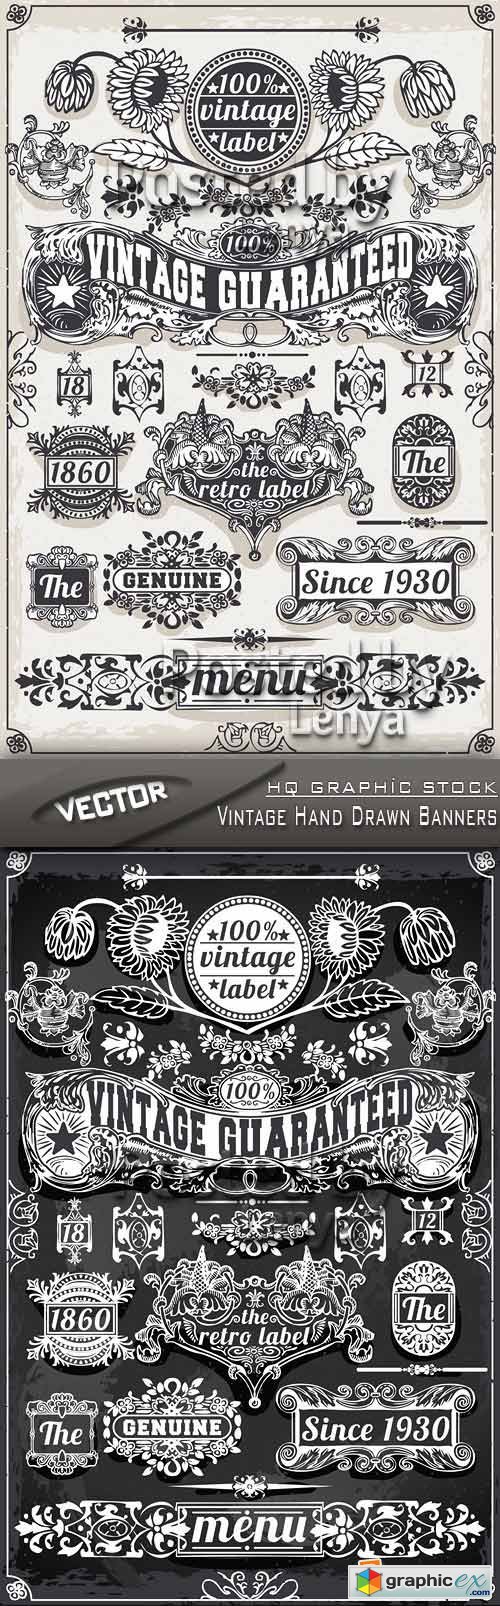 Stock Vector - Vintage Hand Drawn Banners